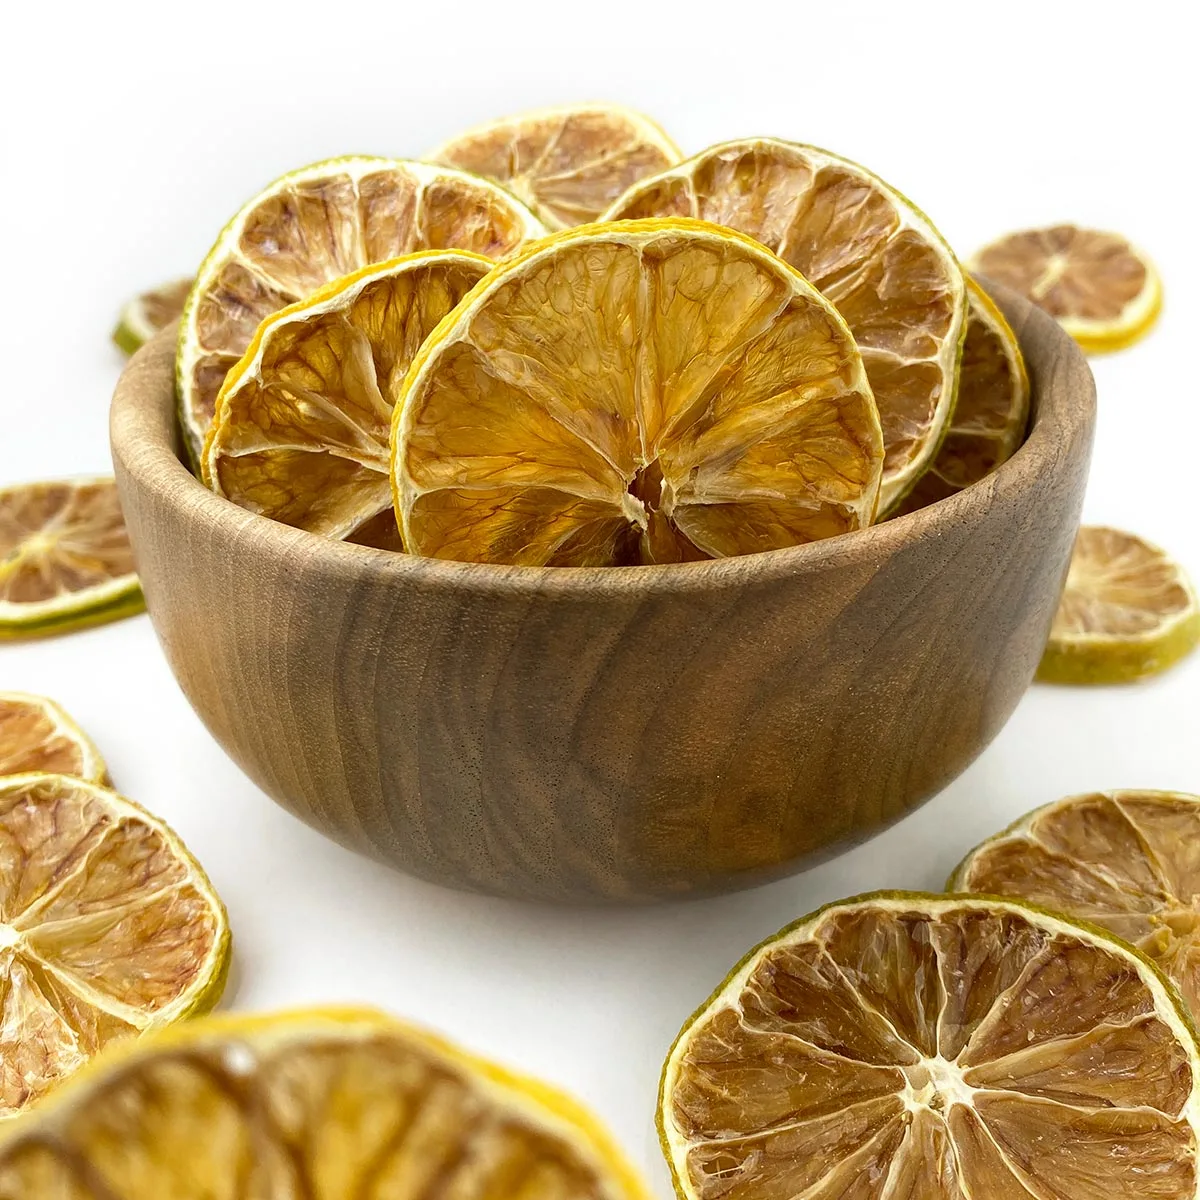 Dried Lemon Slices Wholesale Supplier - Dried Fruits & Nuts Ingredients